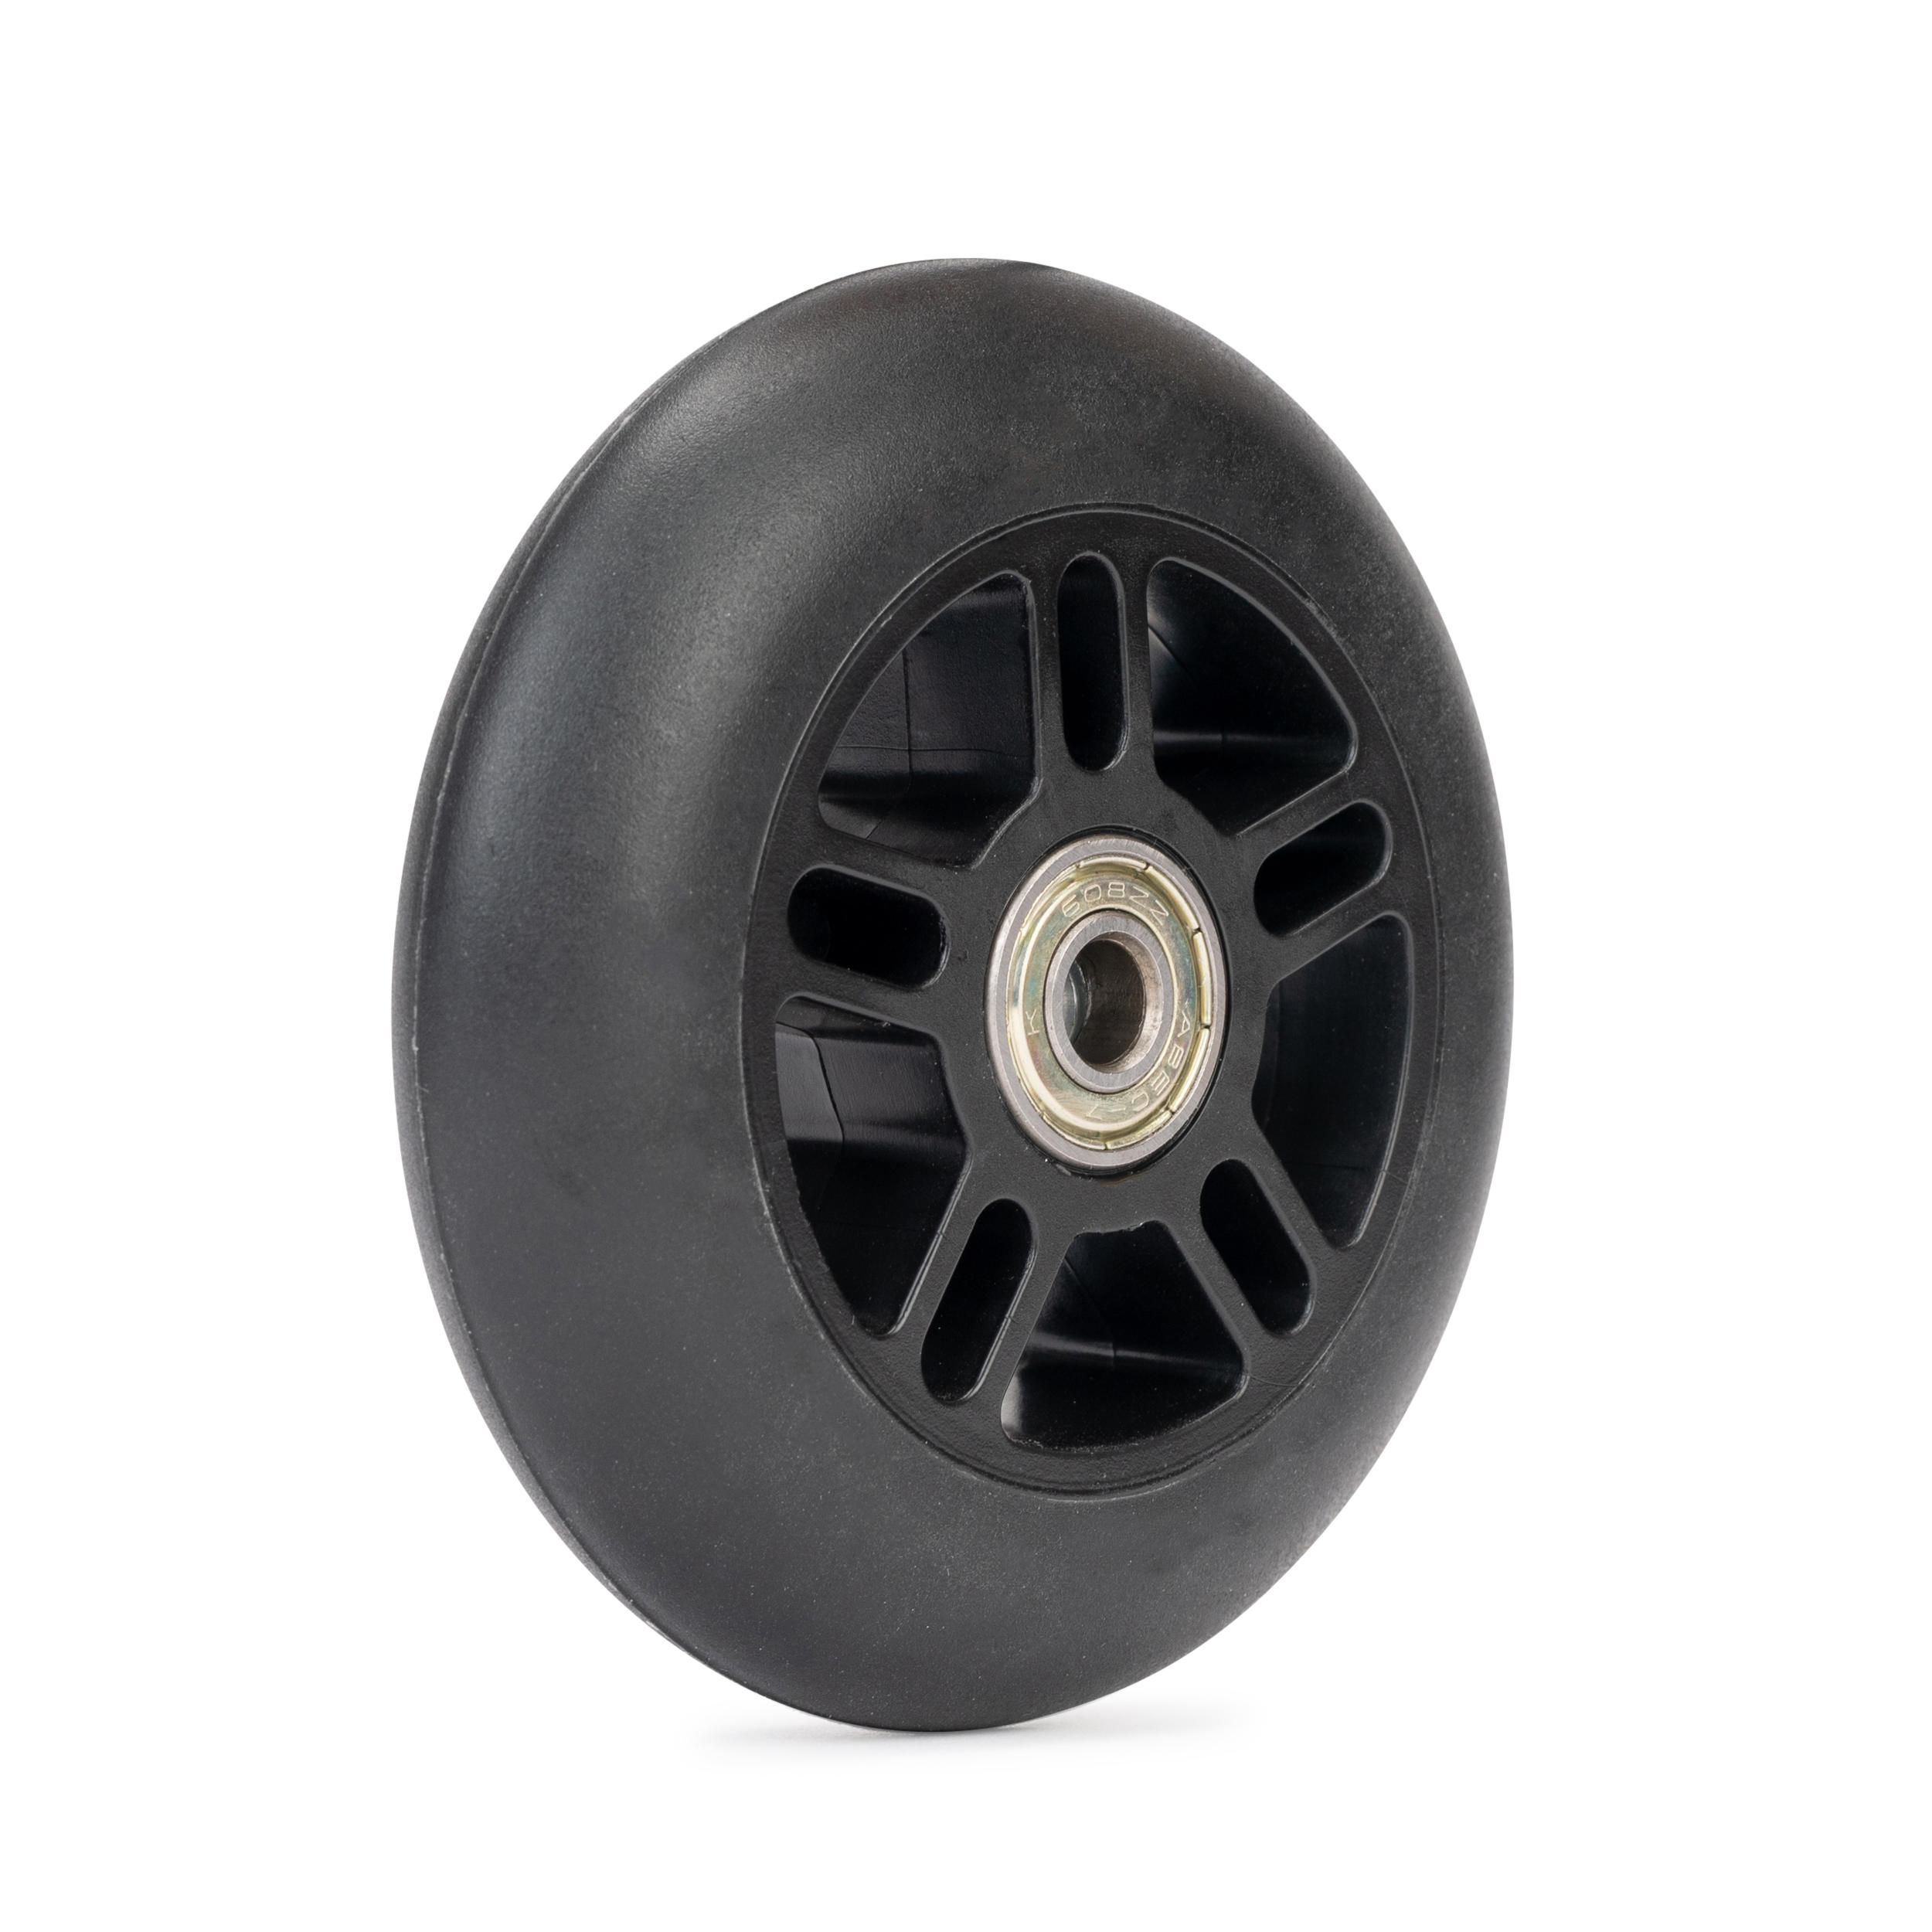 Scooter Wheel with Bearings 100 mm - OXELO